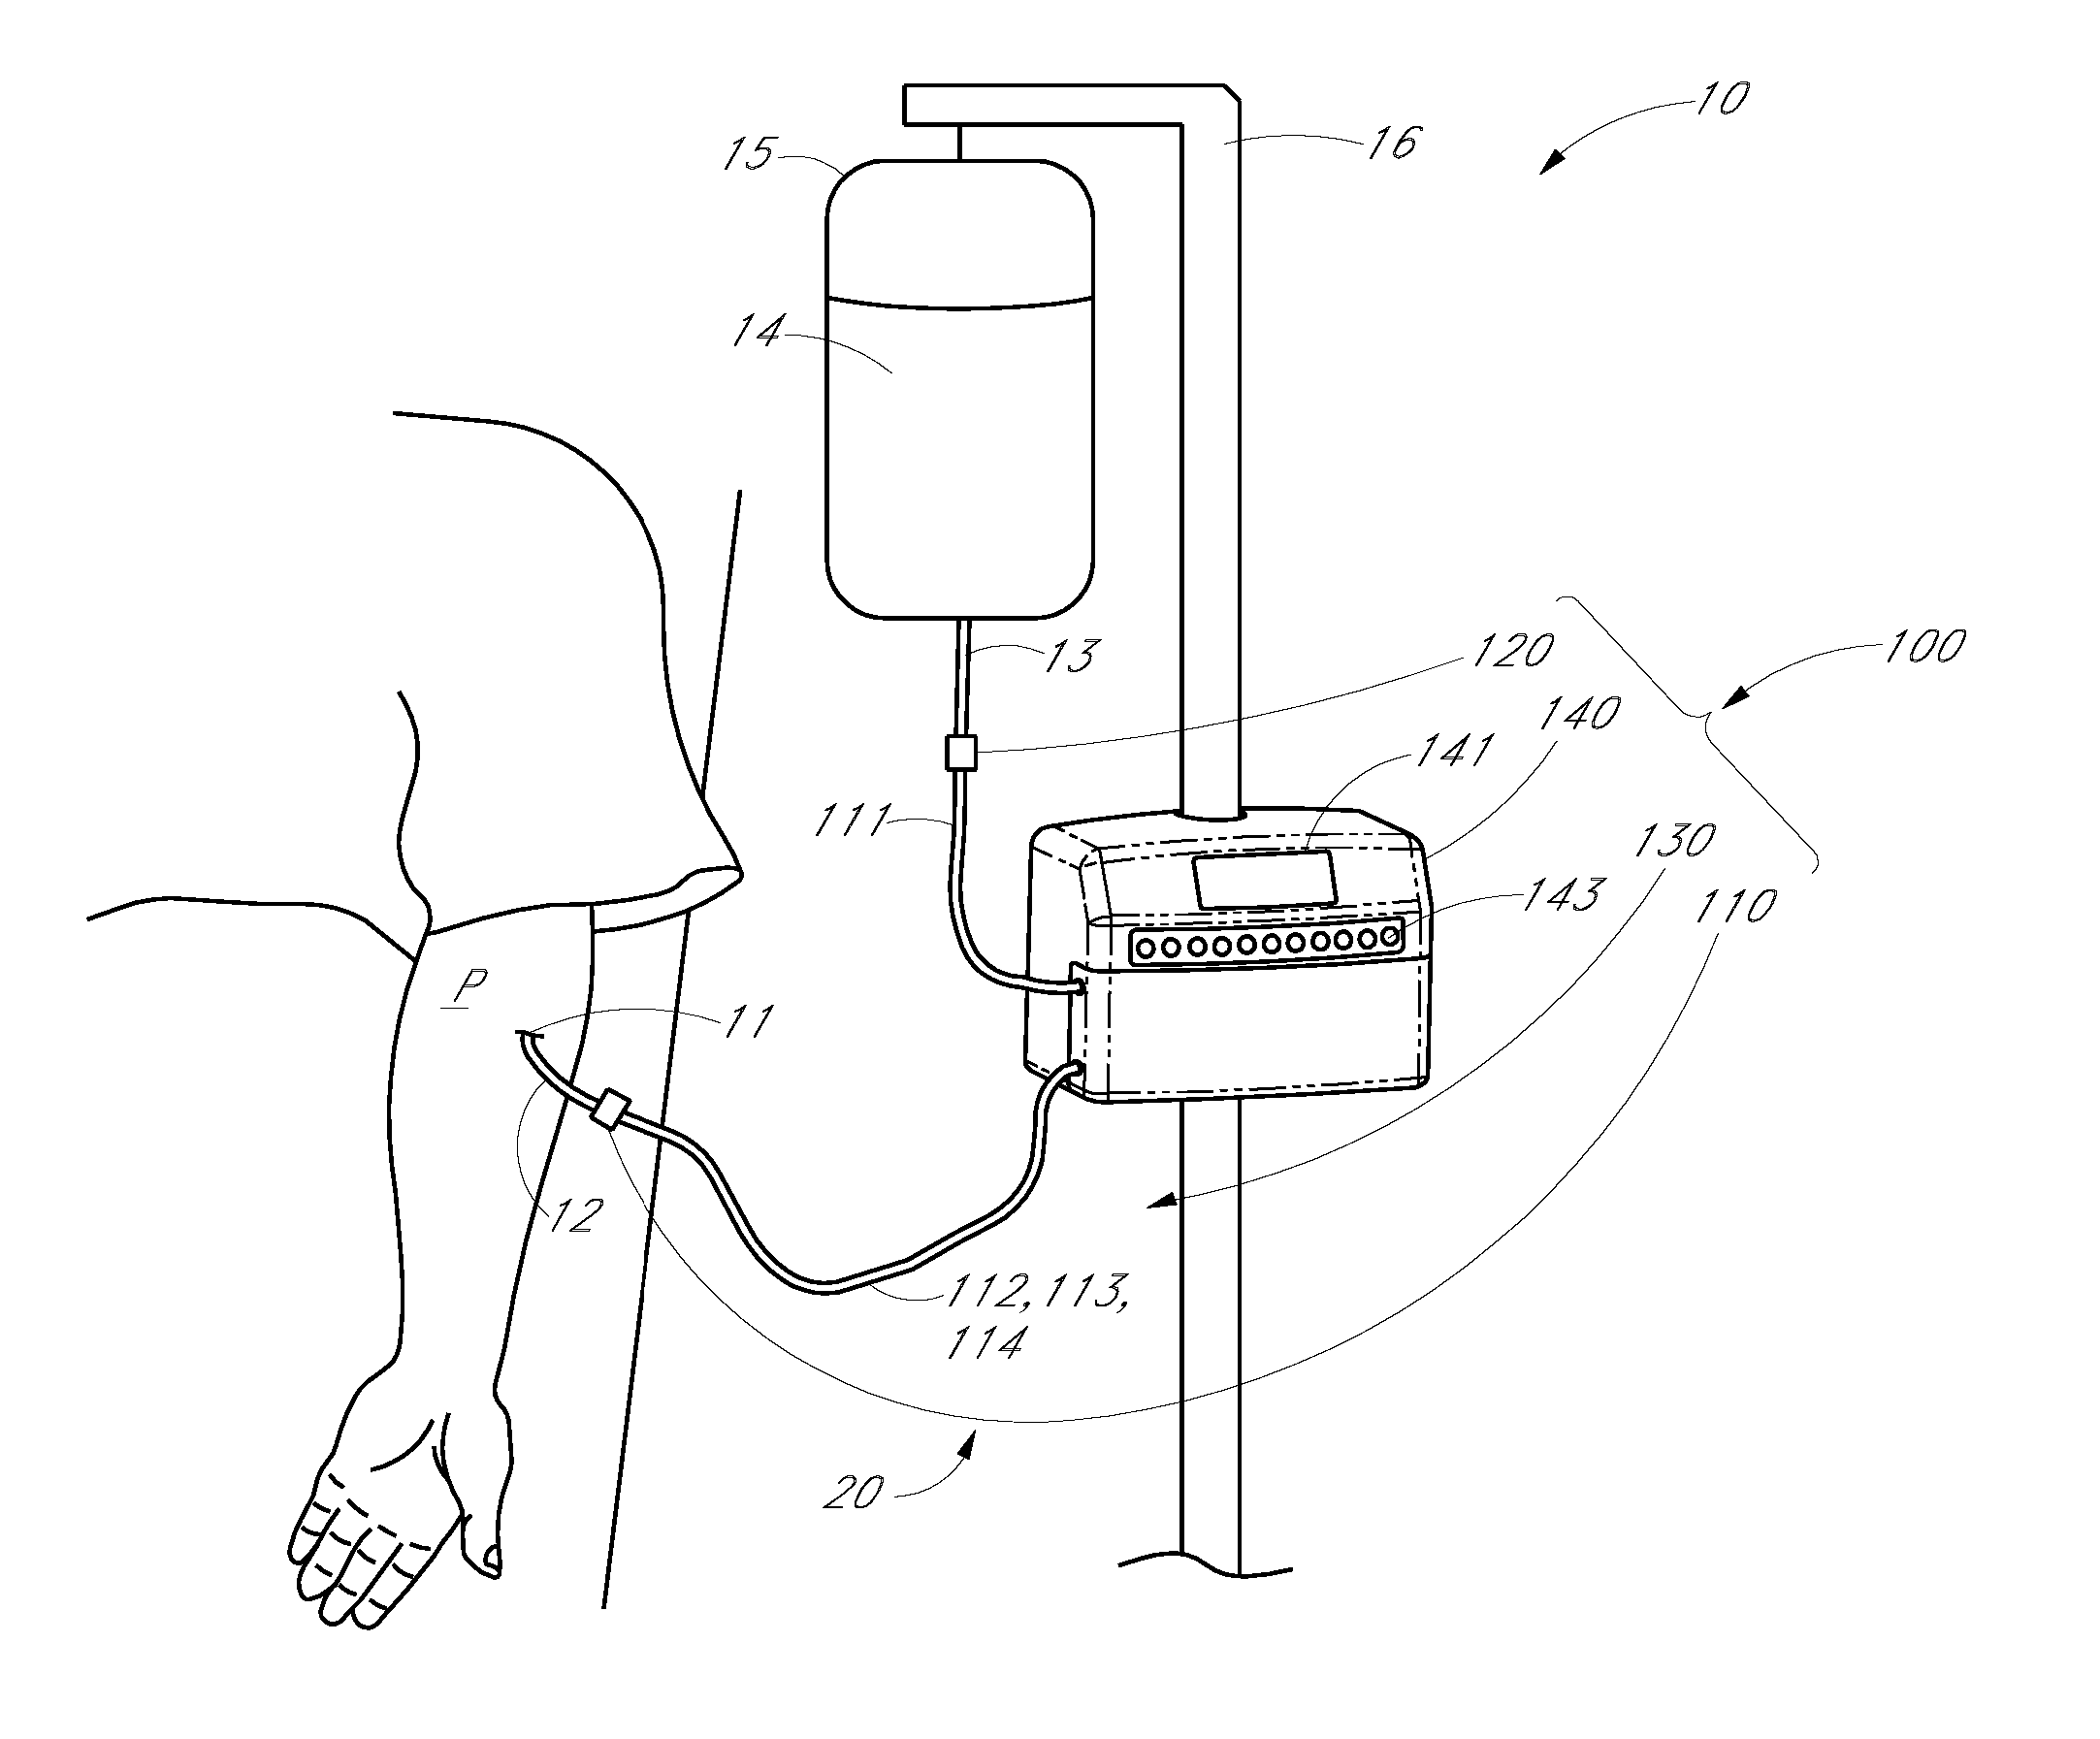 Apparatus and methods for analyzing body fluid samples